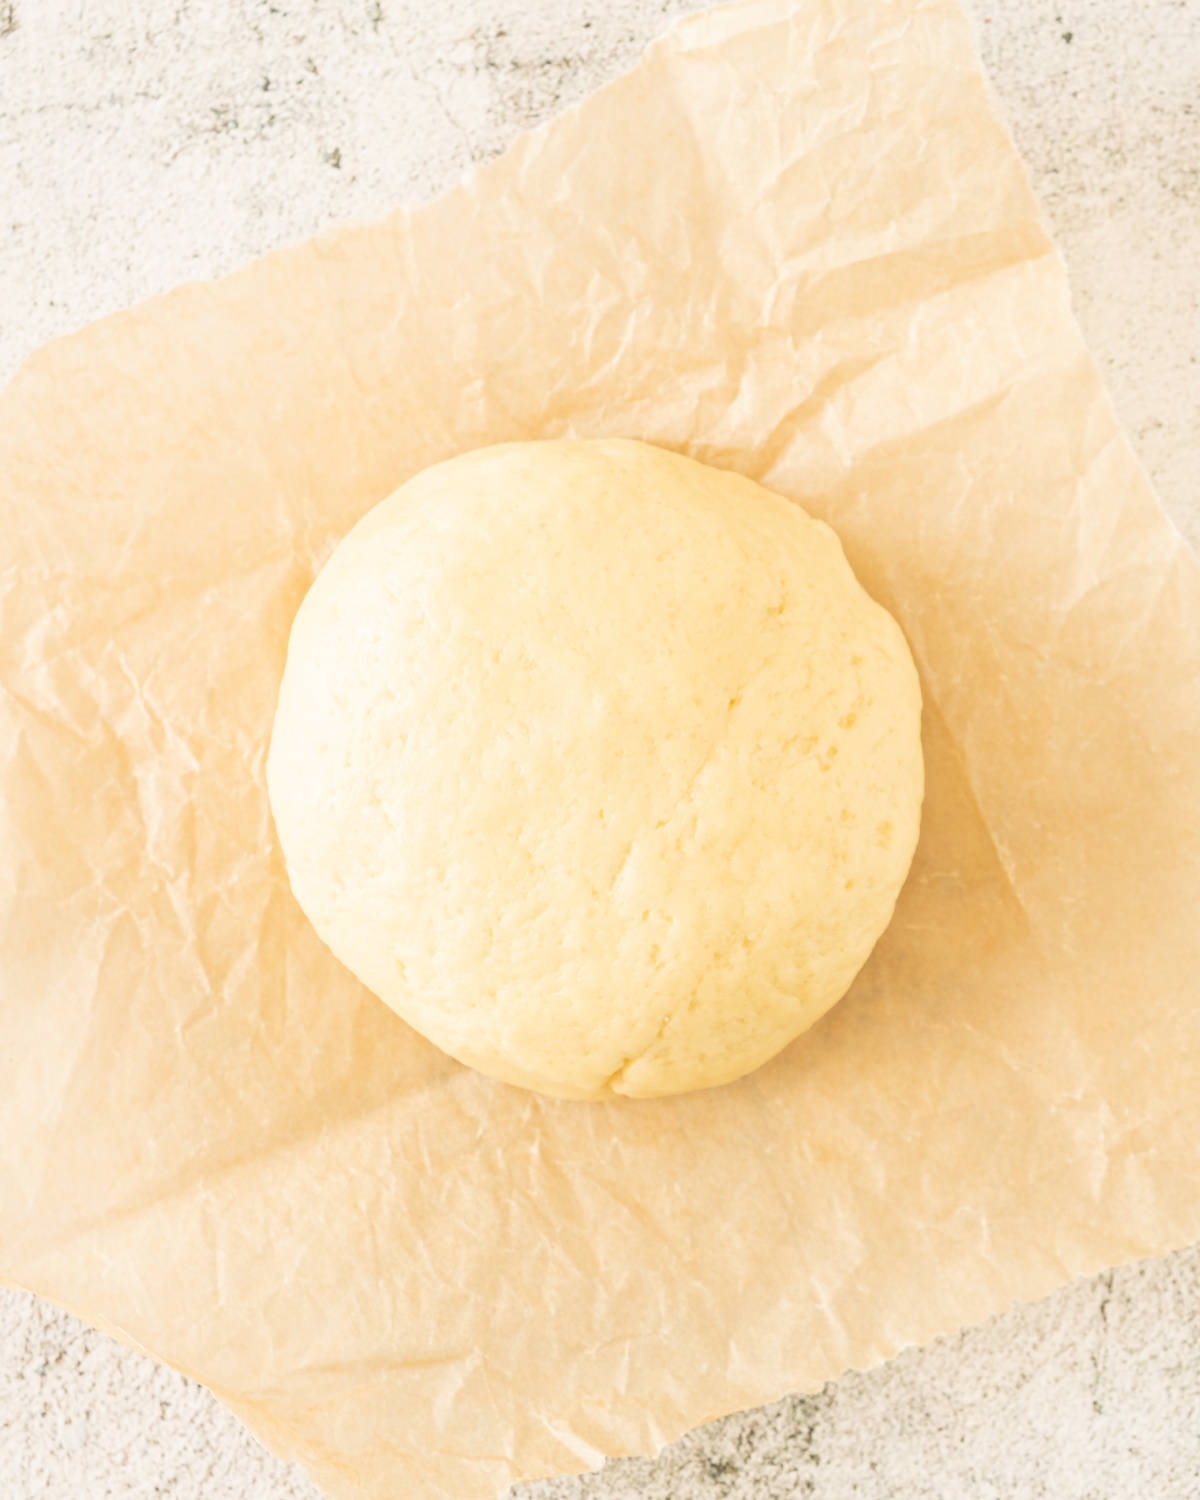 Round ball of pie crust on a beige paper on a light grey surface.